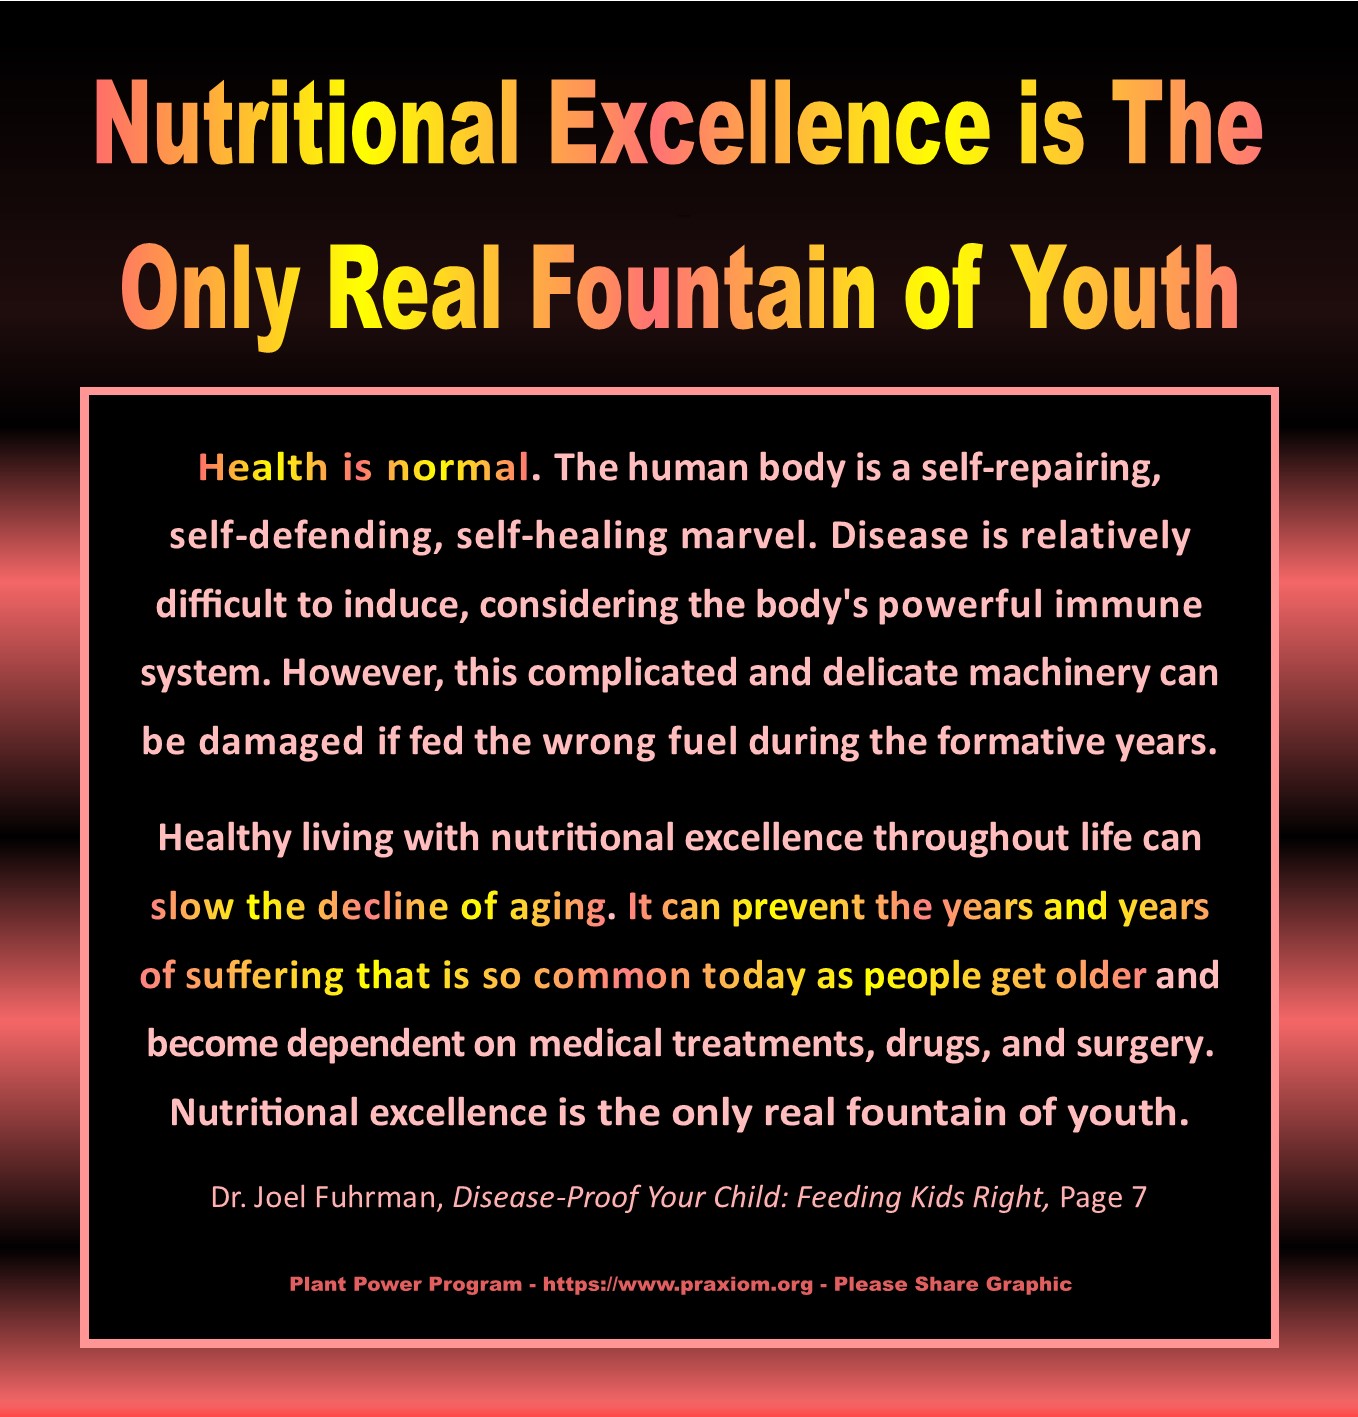 Nutritional Excellence is The Only Fountain of Youth - Dr. Joel Fuhrman